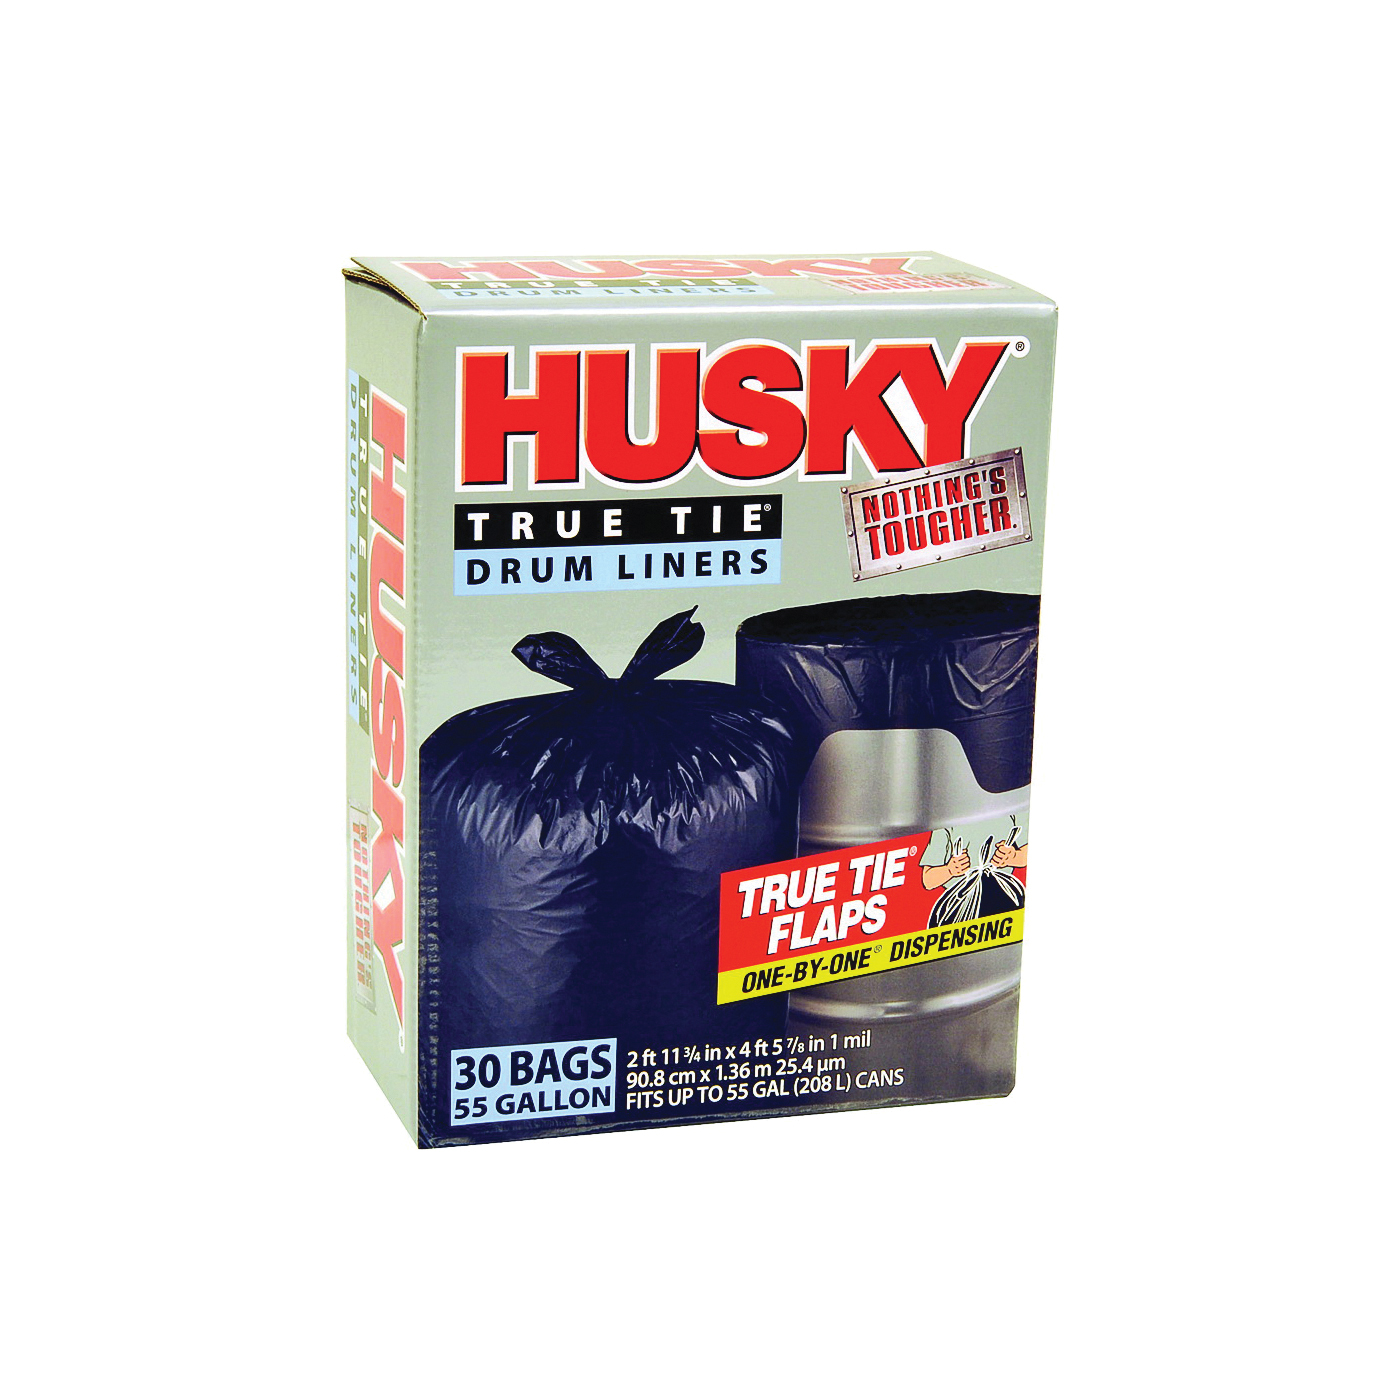 Husky Hk18xds050w Trash Compactor Bags, White, 18 Gallon (Pack of 3)